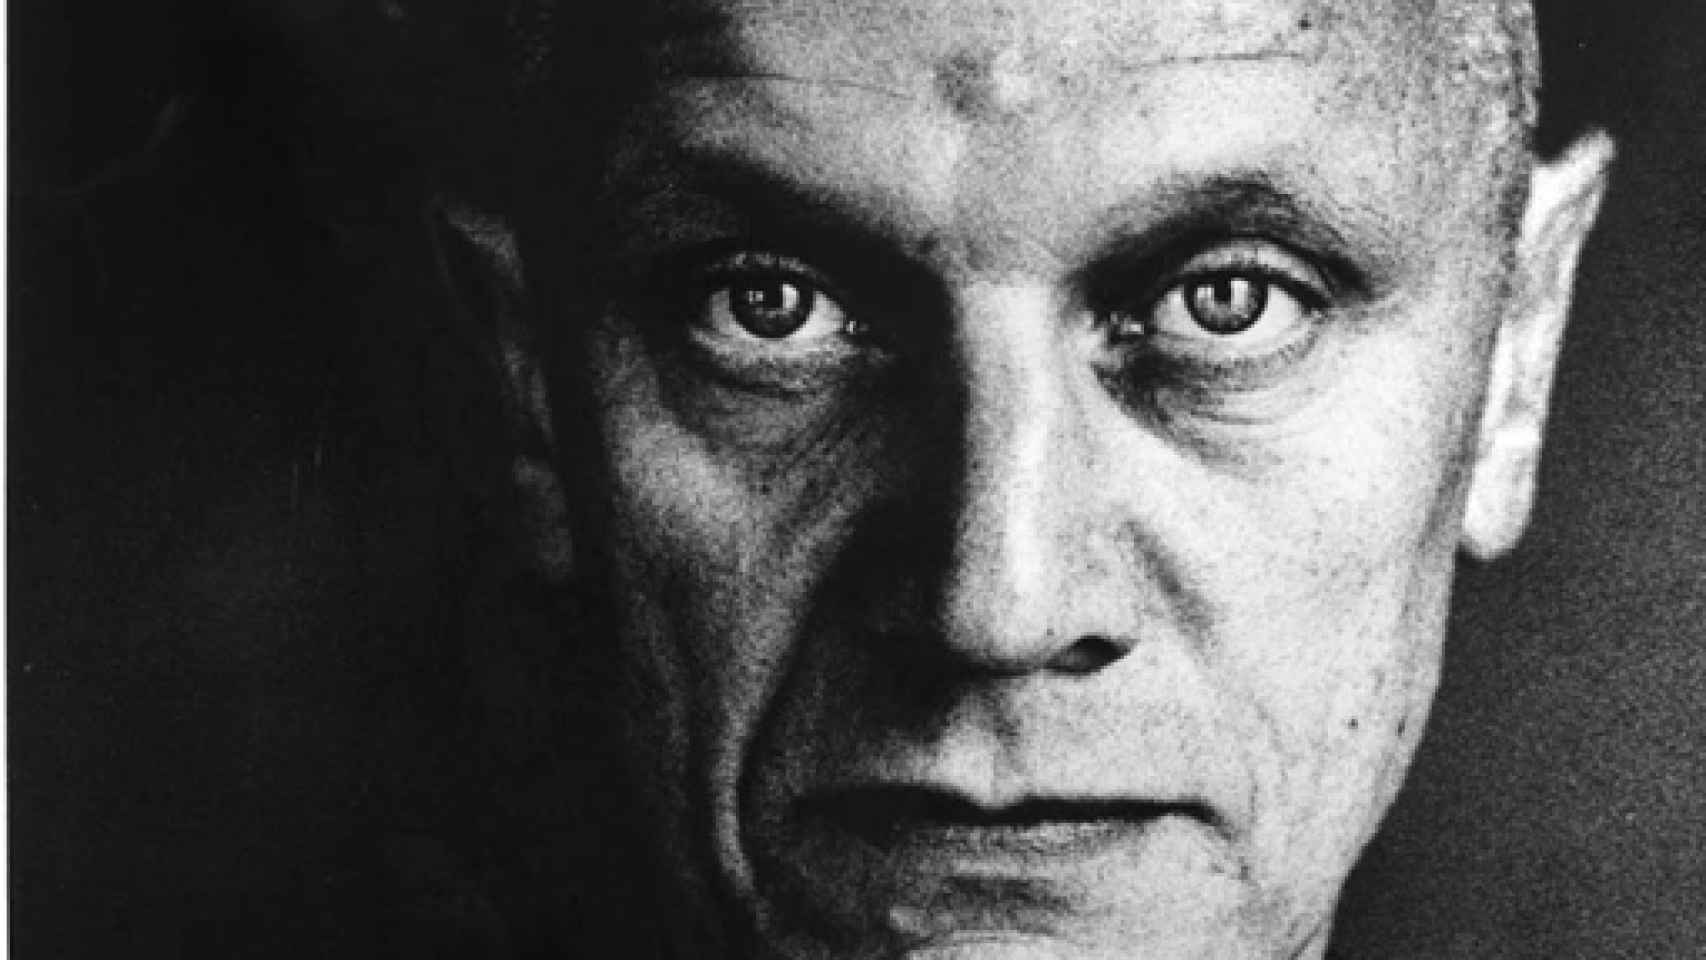 Image: Steven Berkoff: “Shakespeare nos hace invencibles”